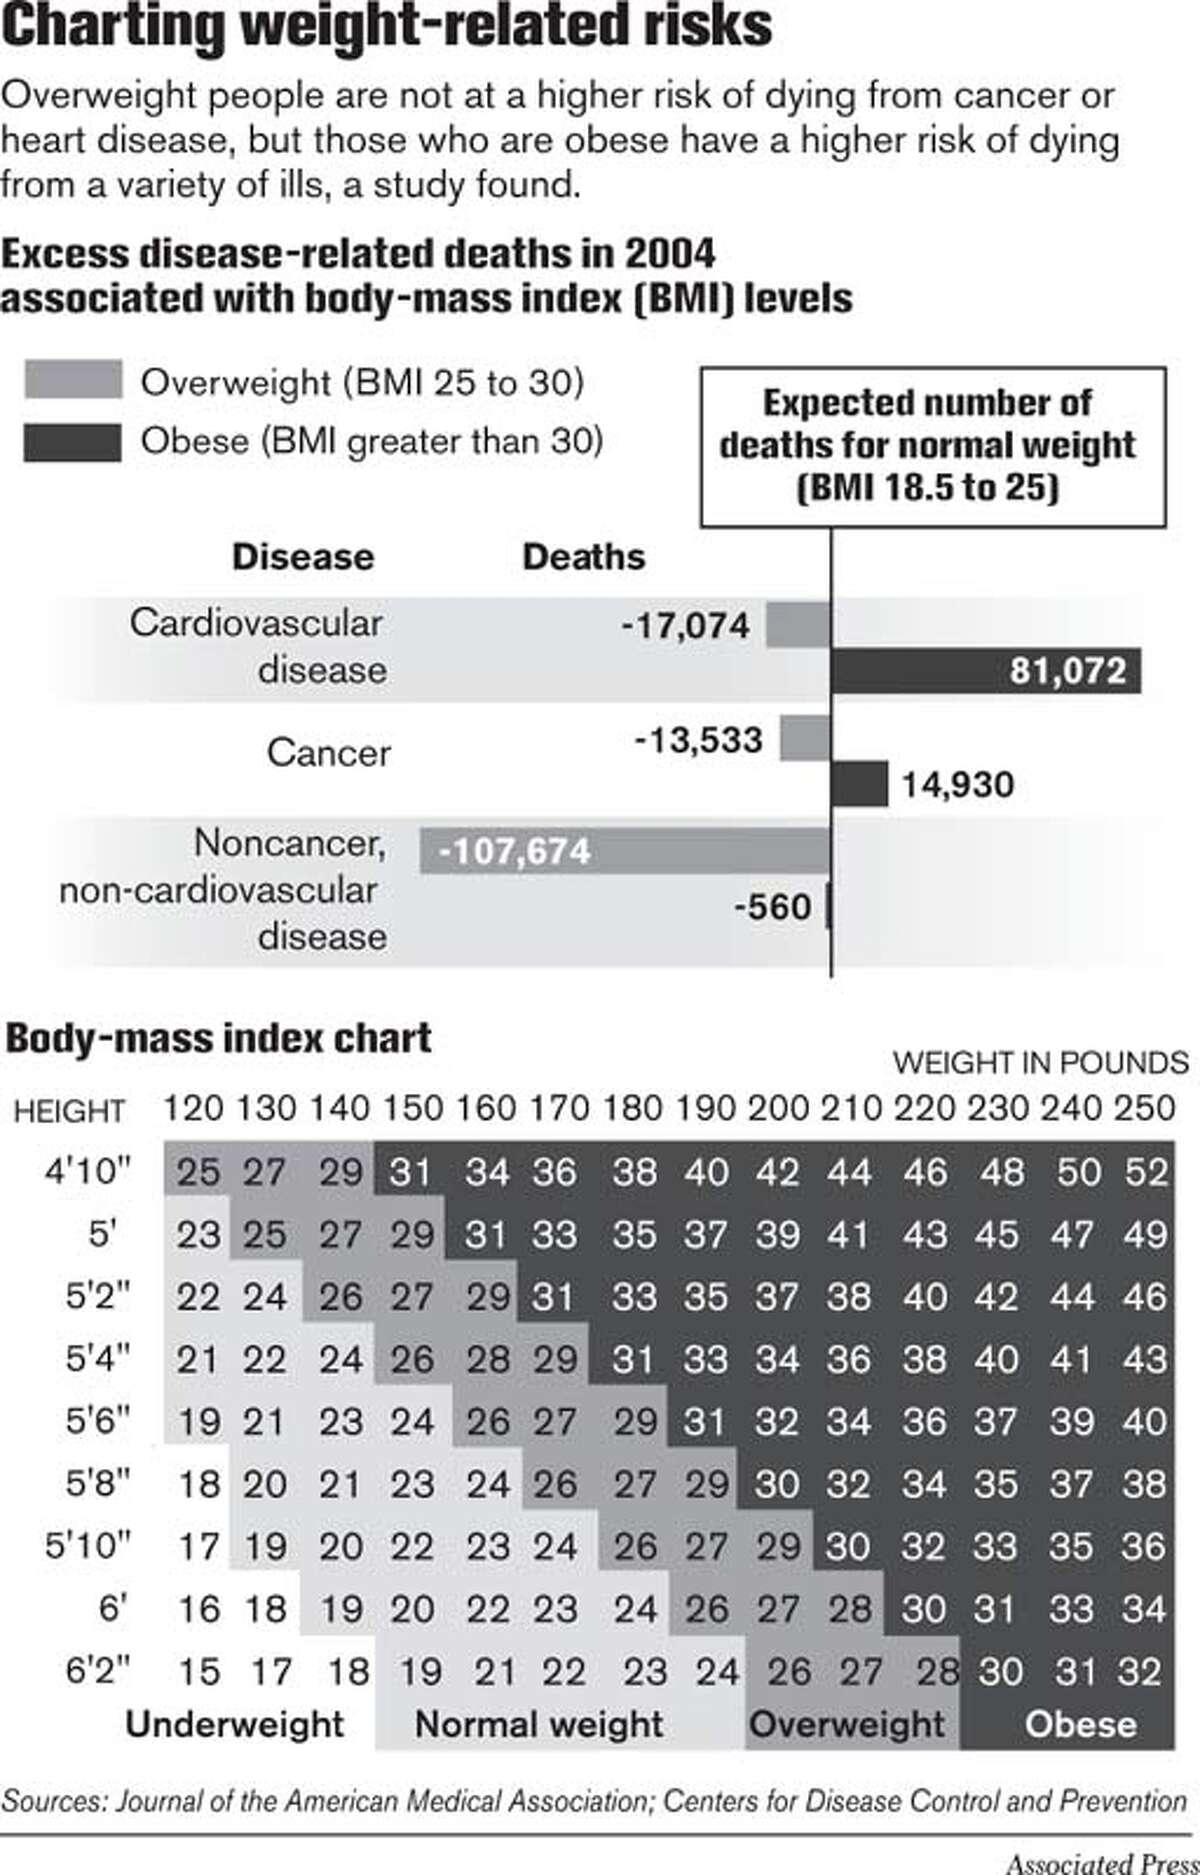 Charting Weight-Related Risks. Associated Press Graphic